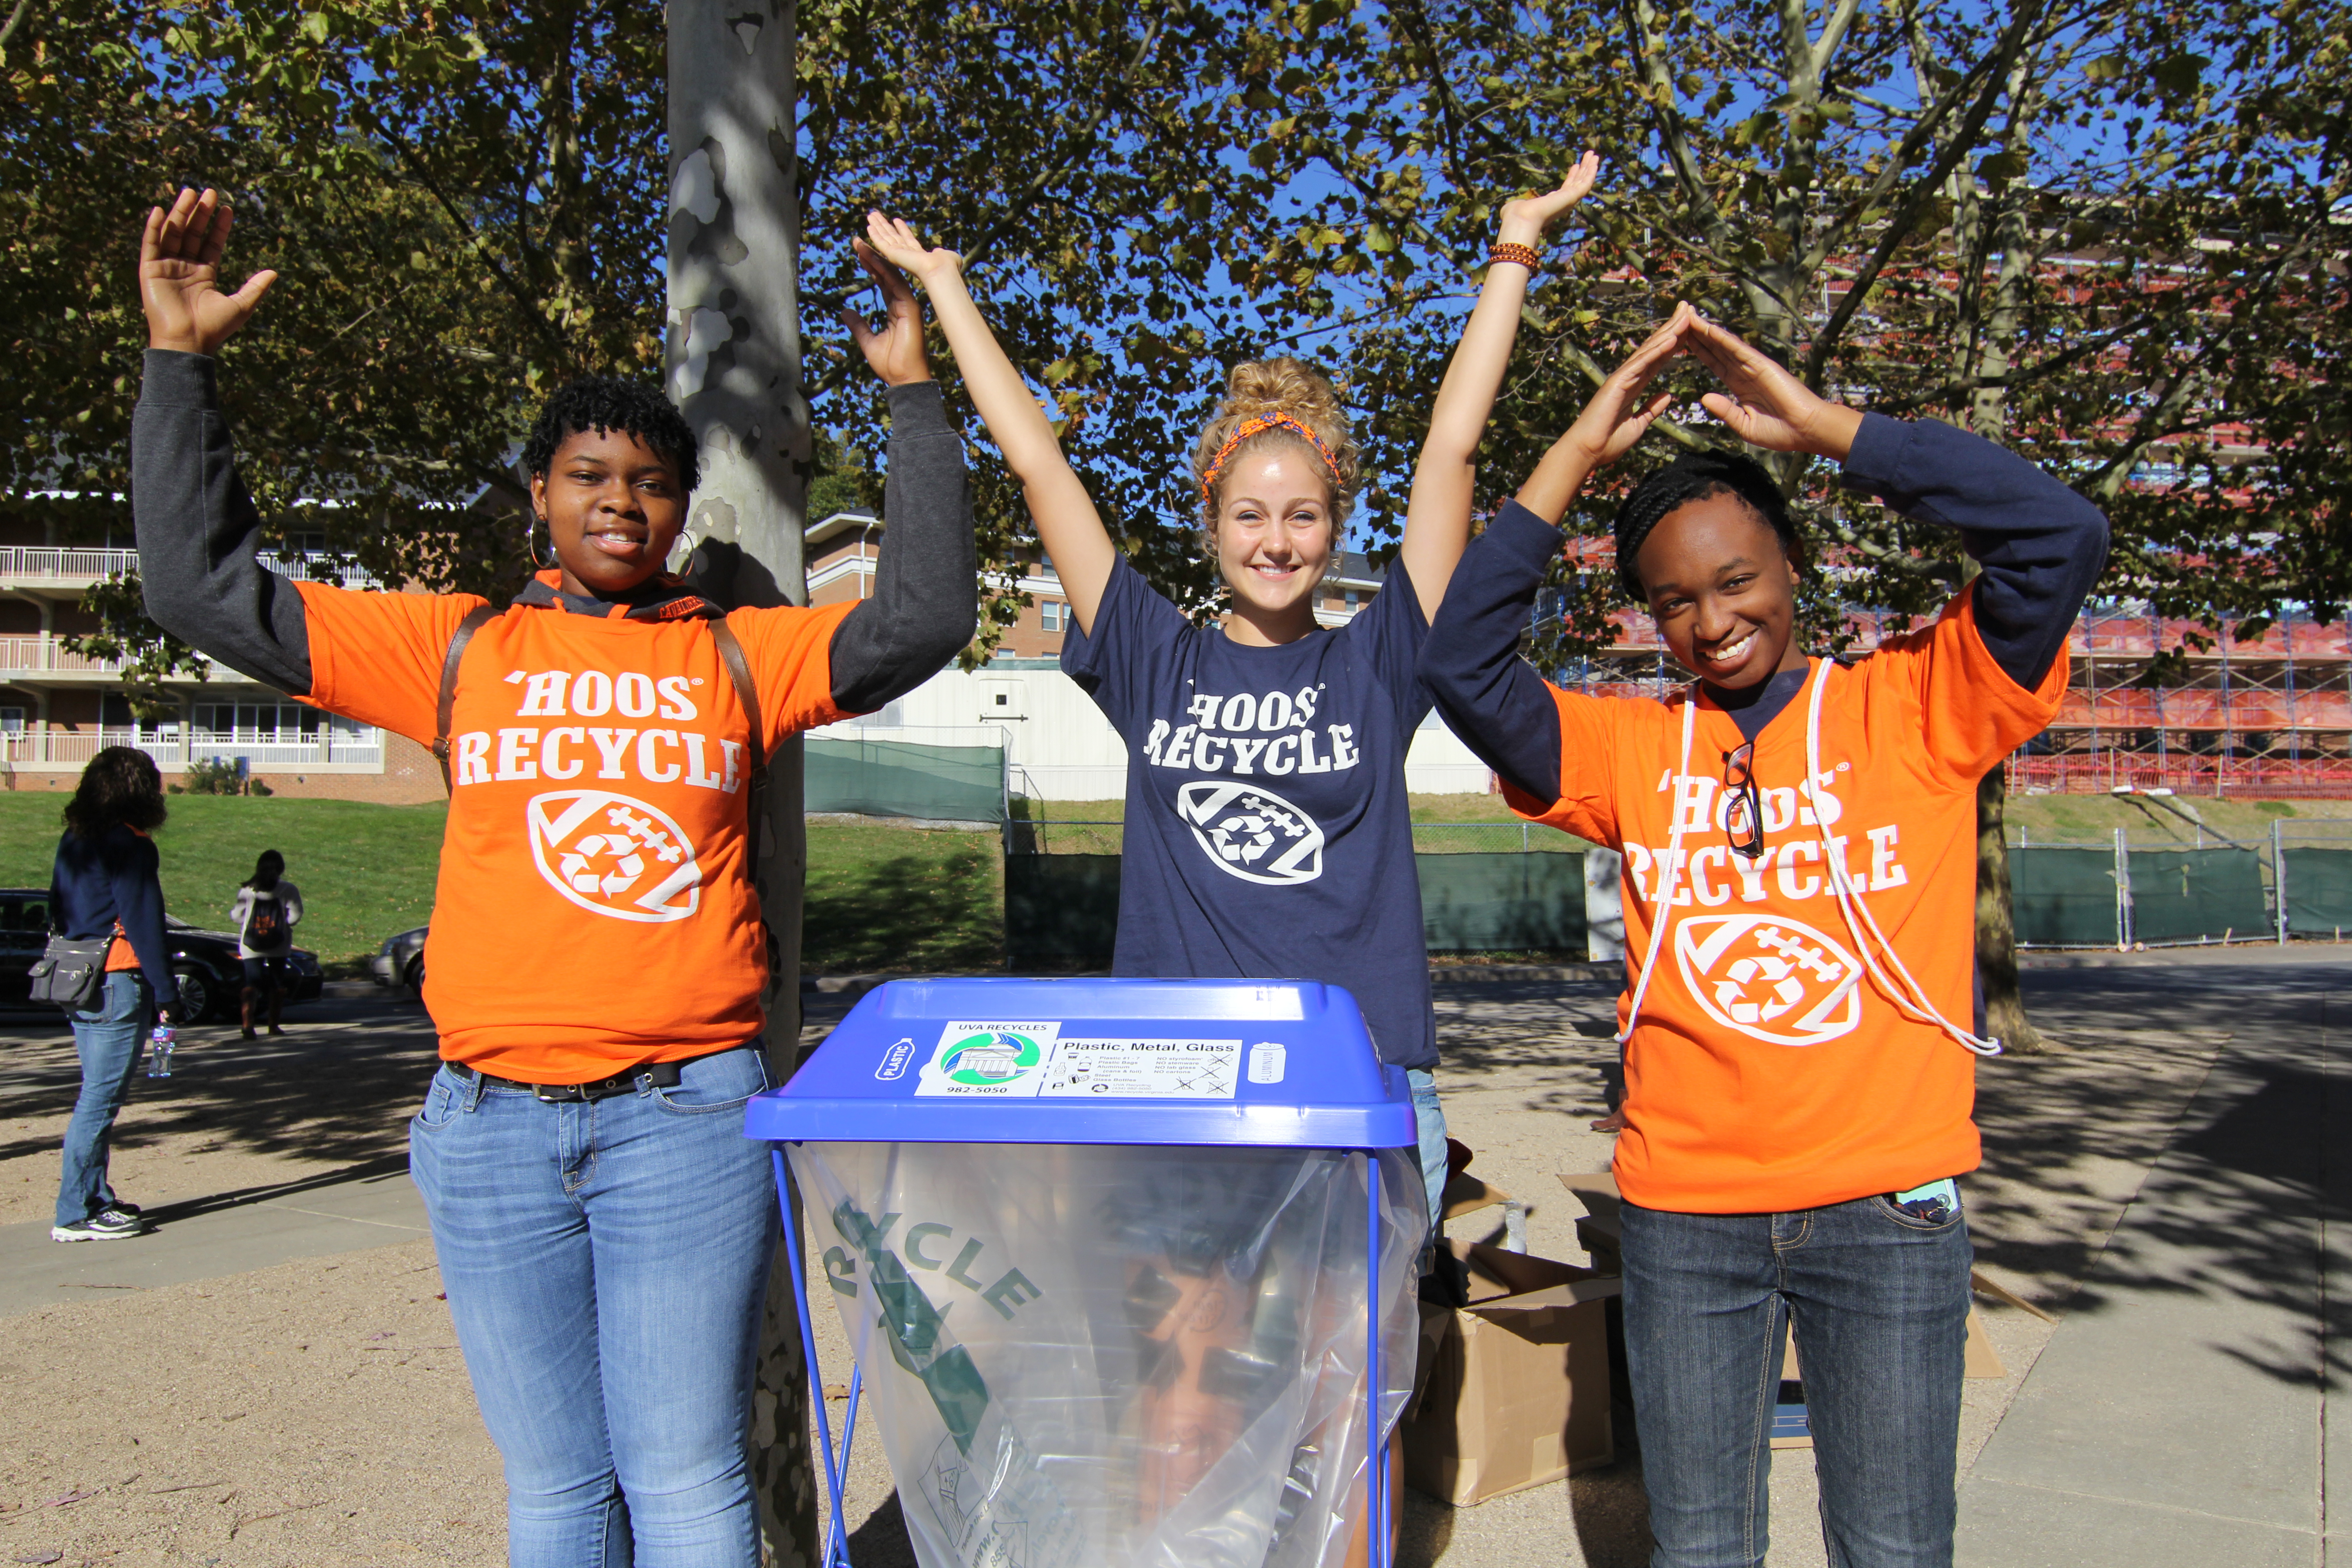 Three UVA students spell UVA with their arms at a recycling station